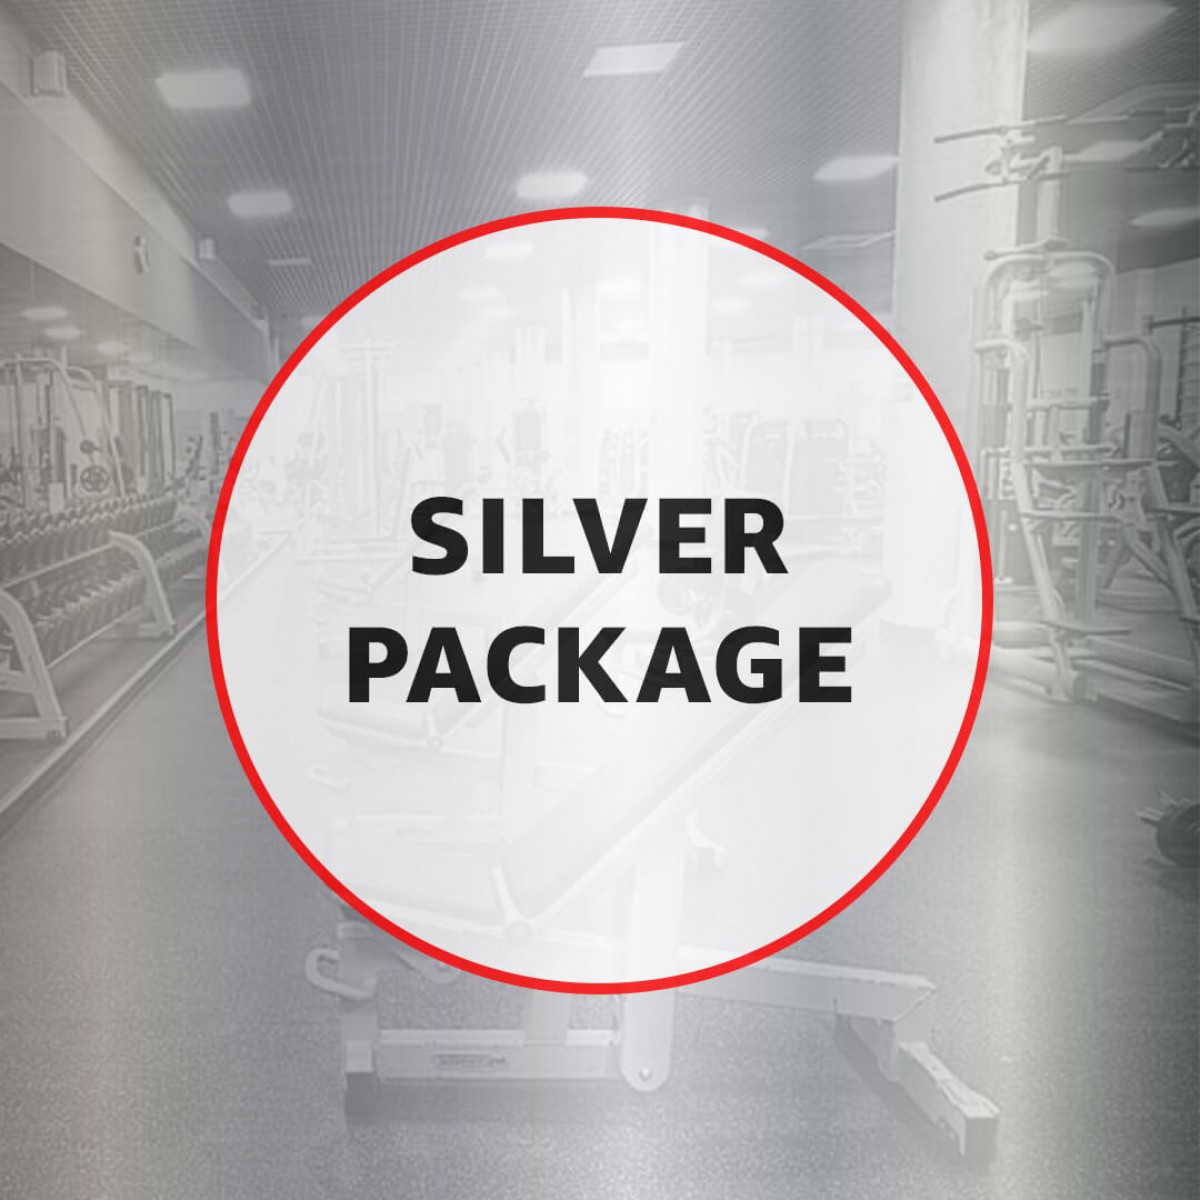 University, College and School Gym - Silver Package